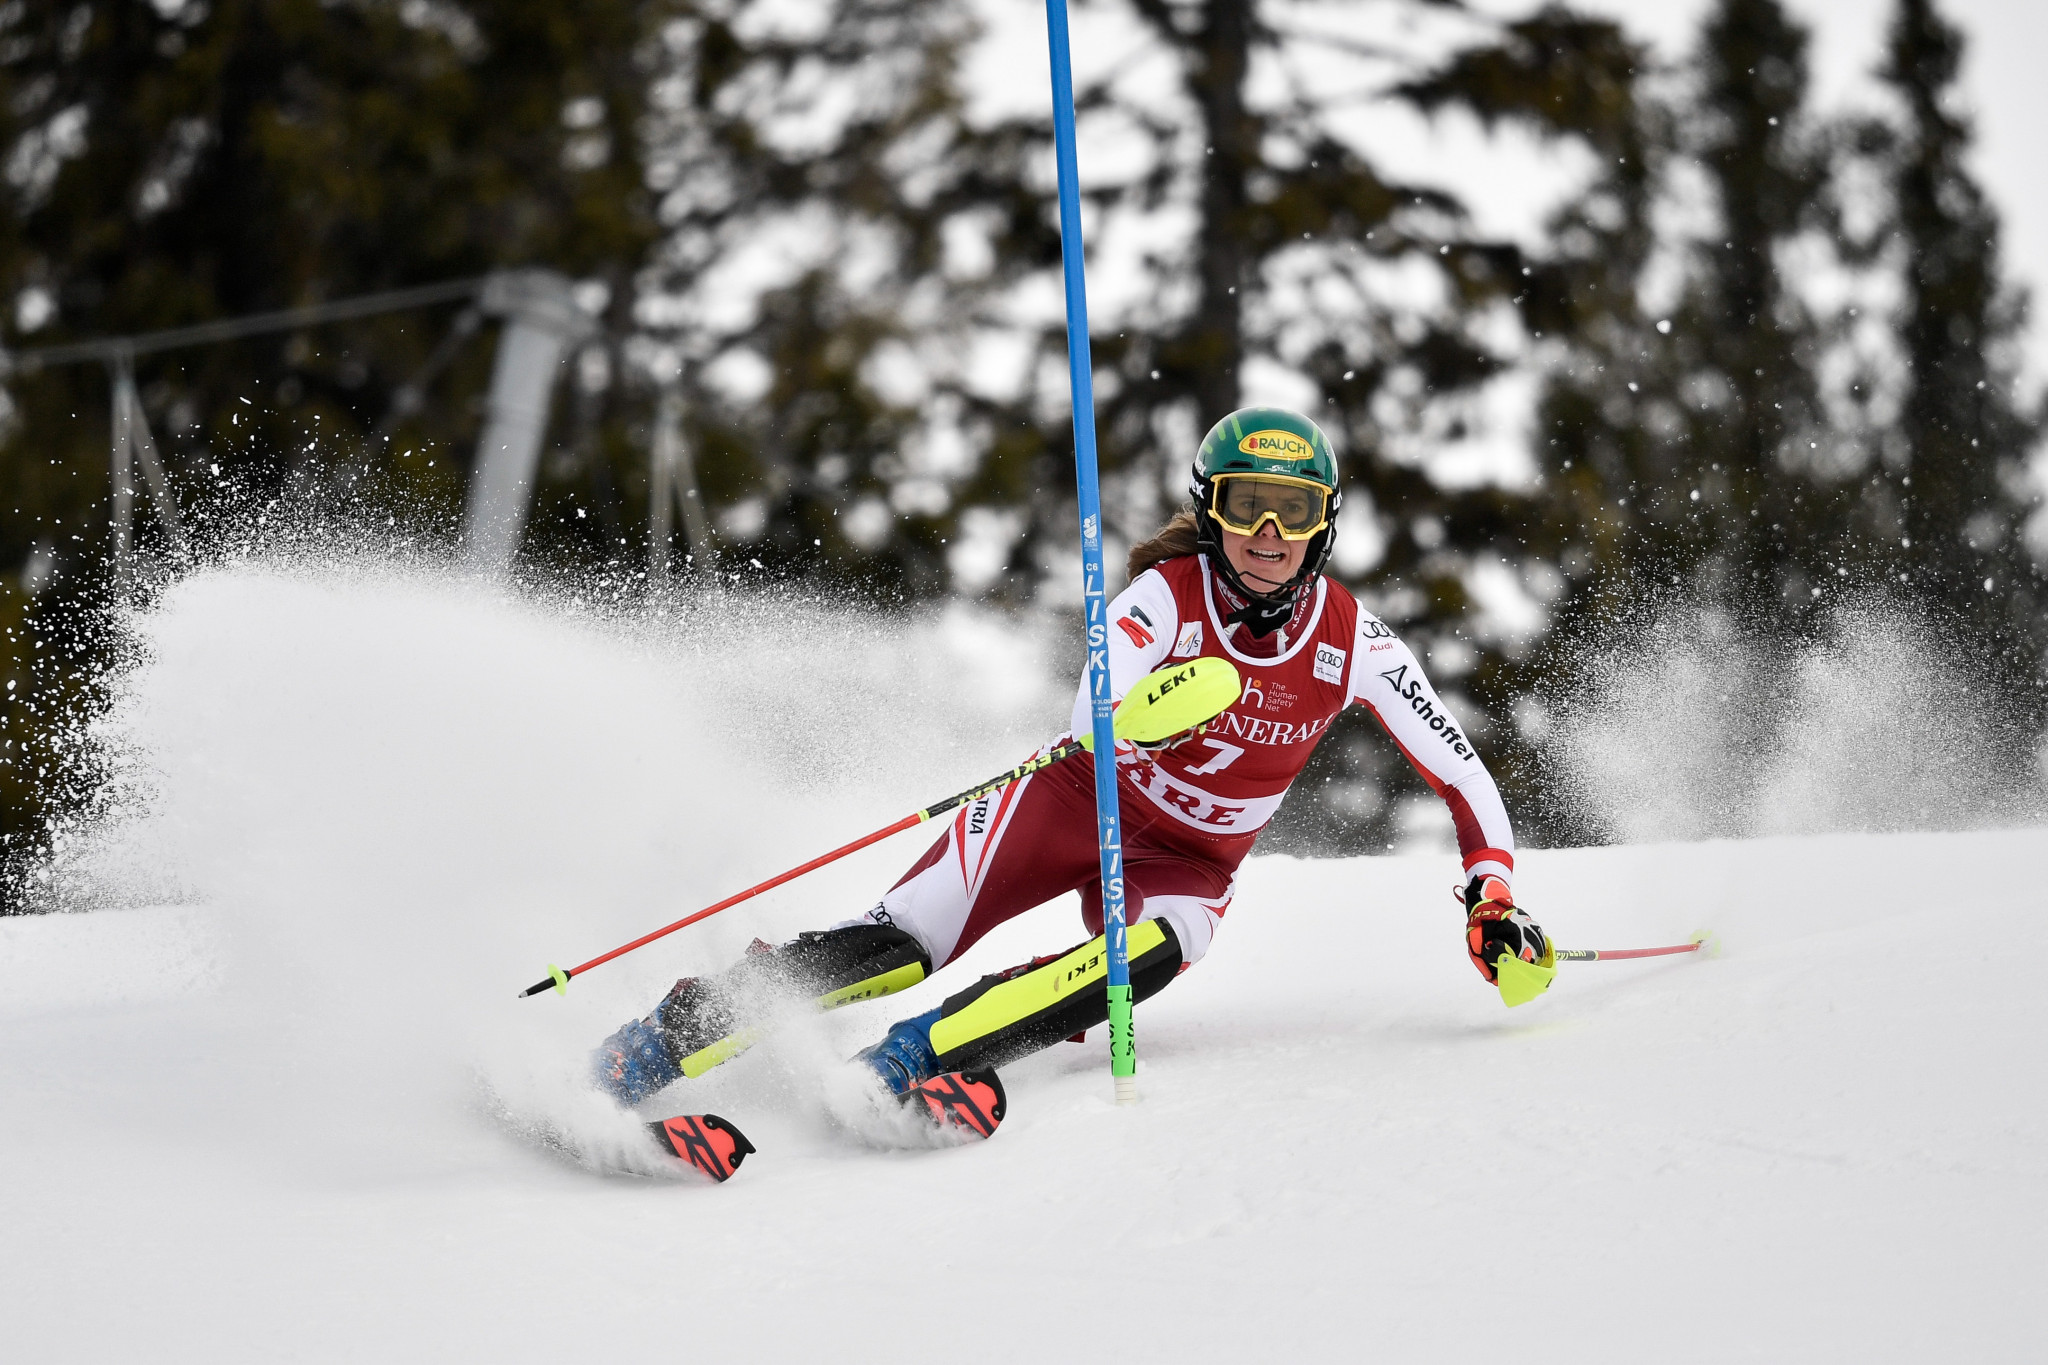 Liensberger earns first-ever World Cup win in Åre